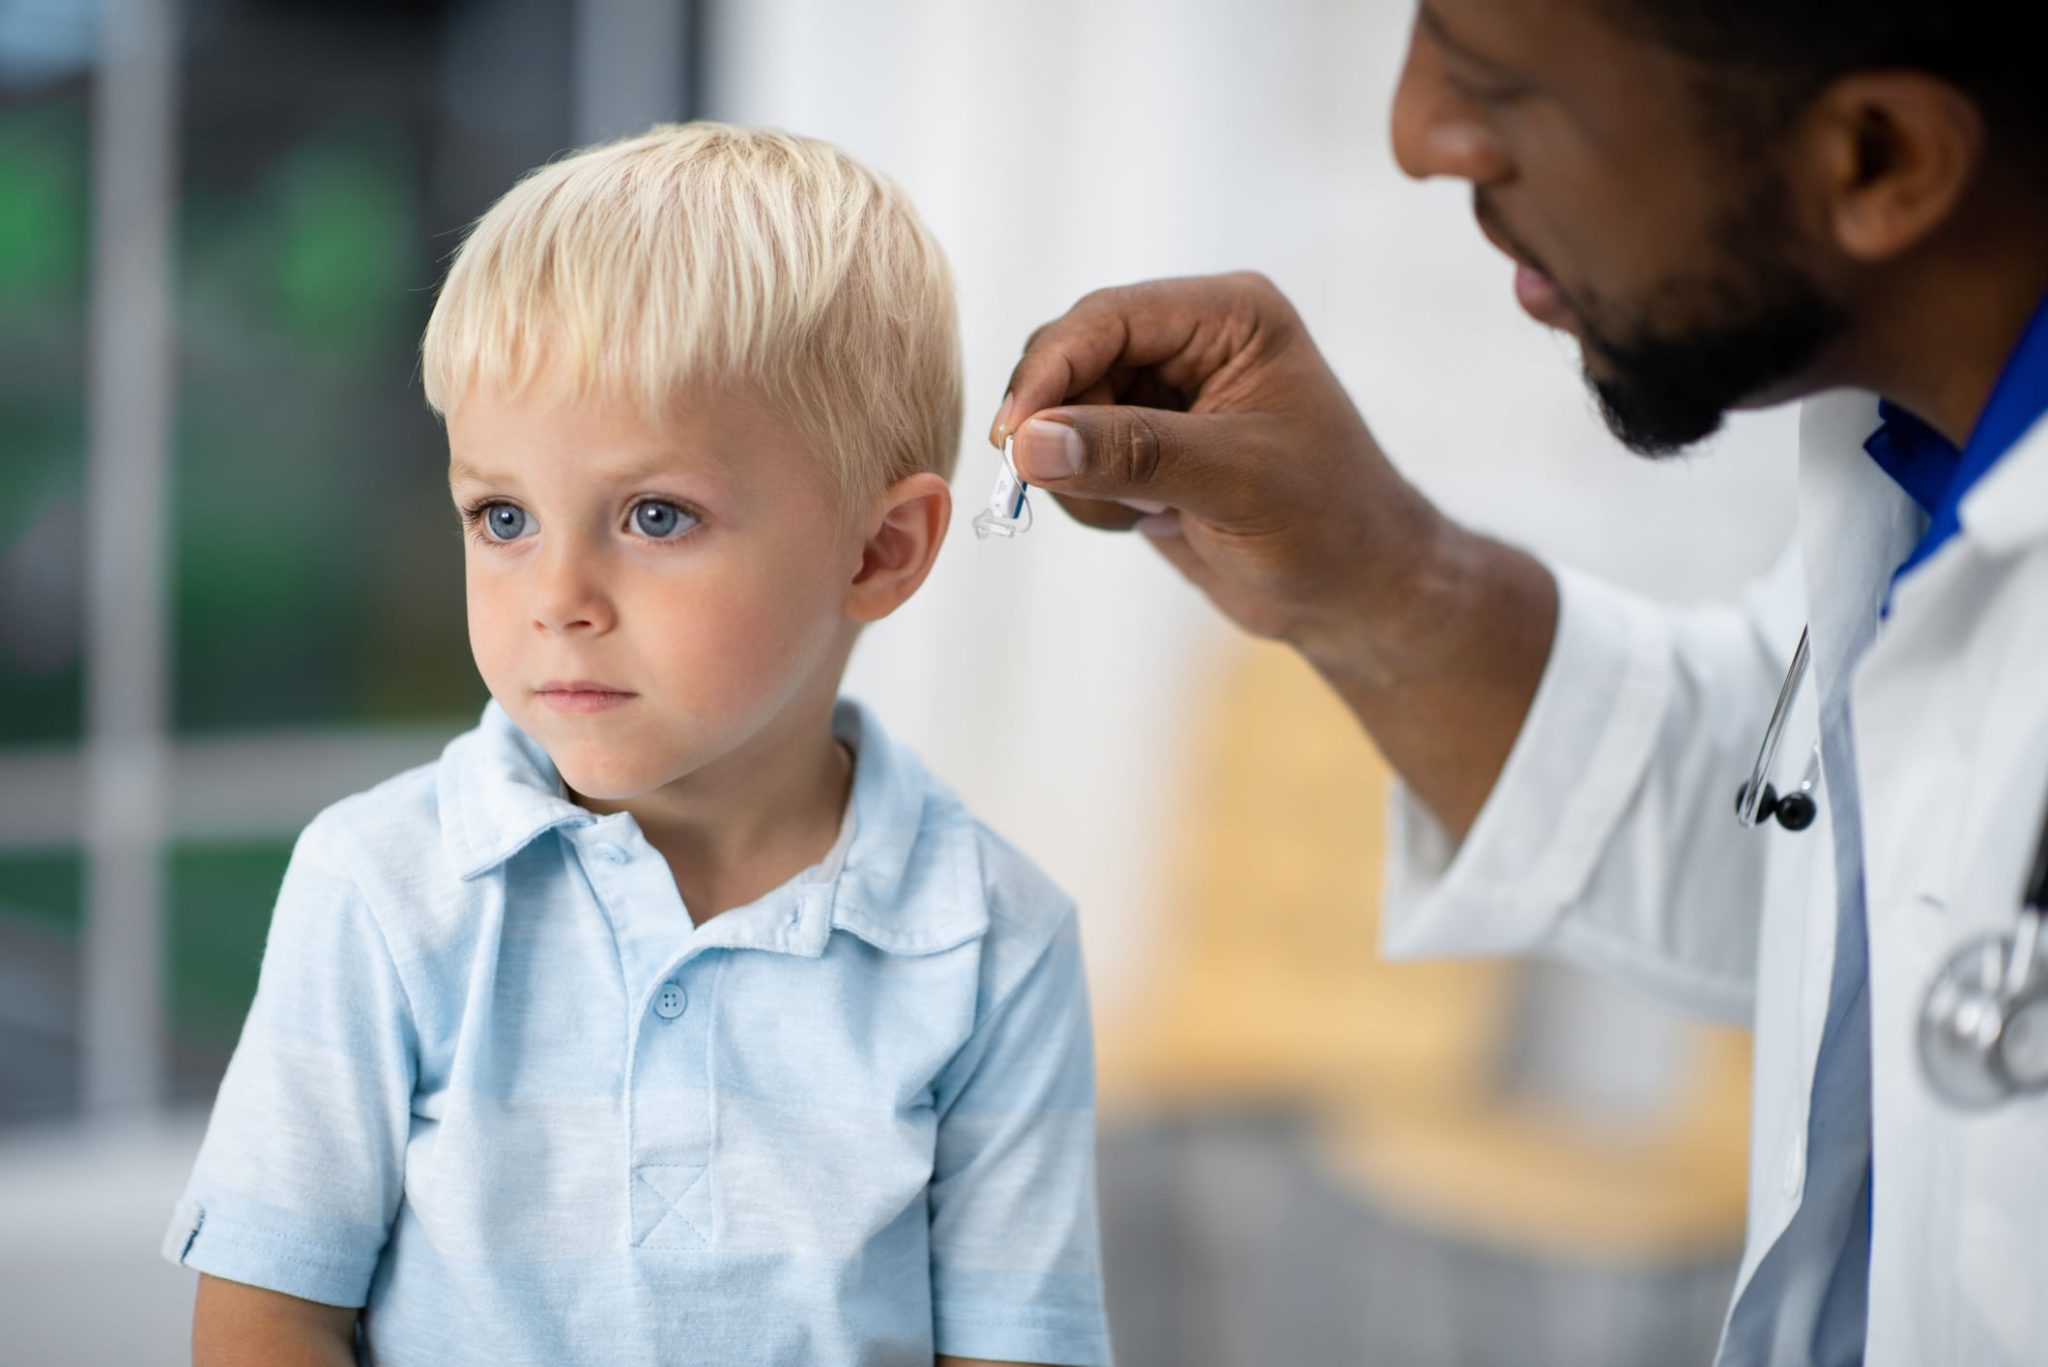 A child being fitted for a hearing aid.